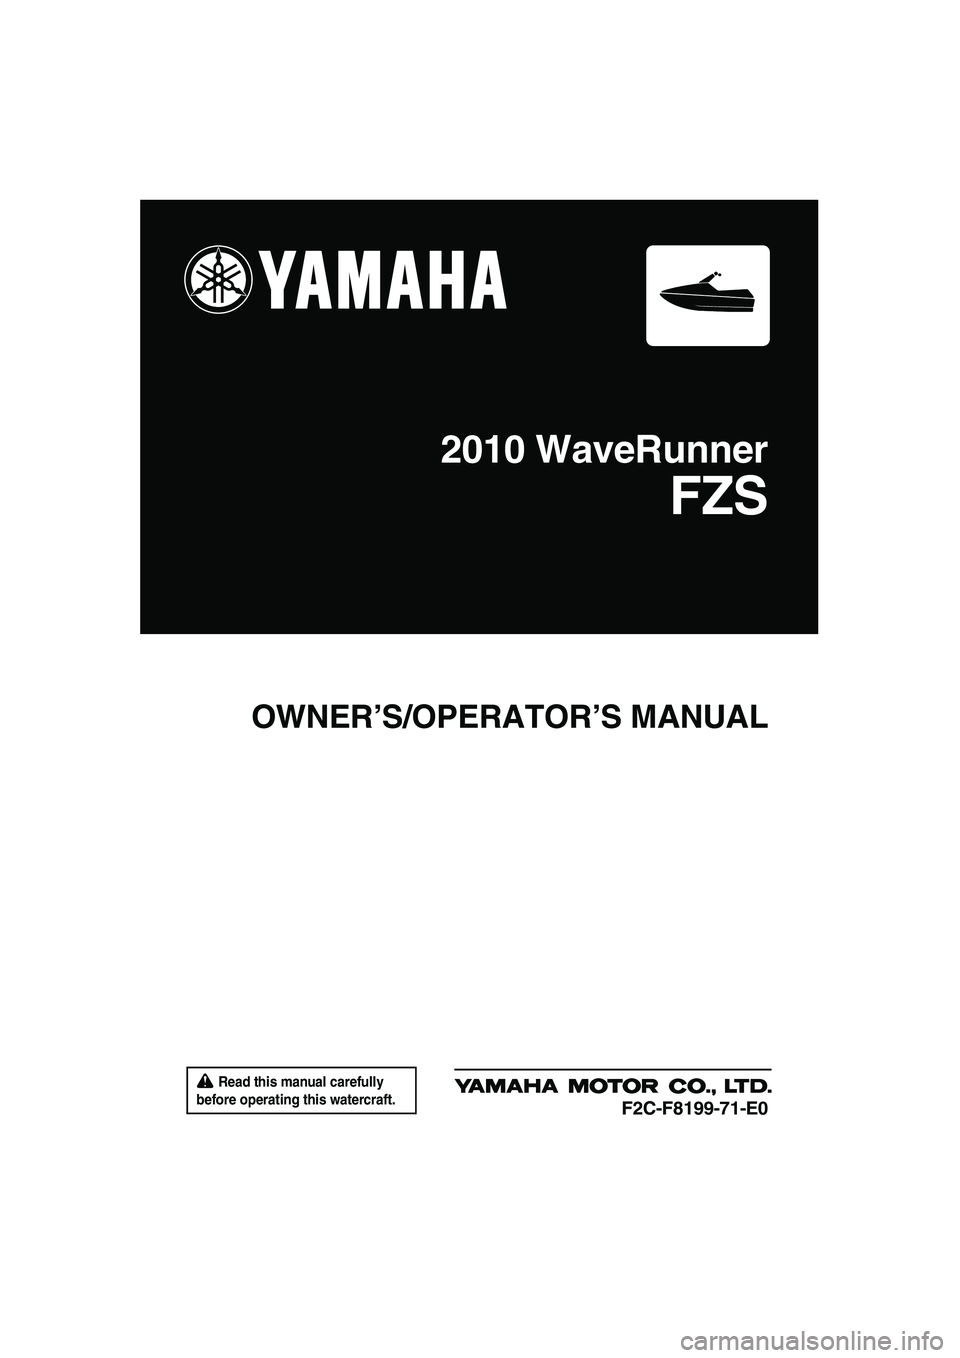 YAMAHA FZS SVHO 2010  Owners Manual  Read this manual carefully 
before operating this watercraft.
OWNER’S/OPERATOR’S MANUAL
2010 WaveRunner
FZS
F2C-F8199-71-E0
UF2C71E0.book  Page 1  Friday, July 10, 2009  1:31 PM 